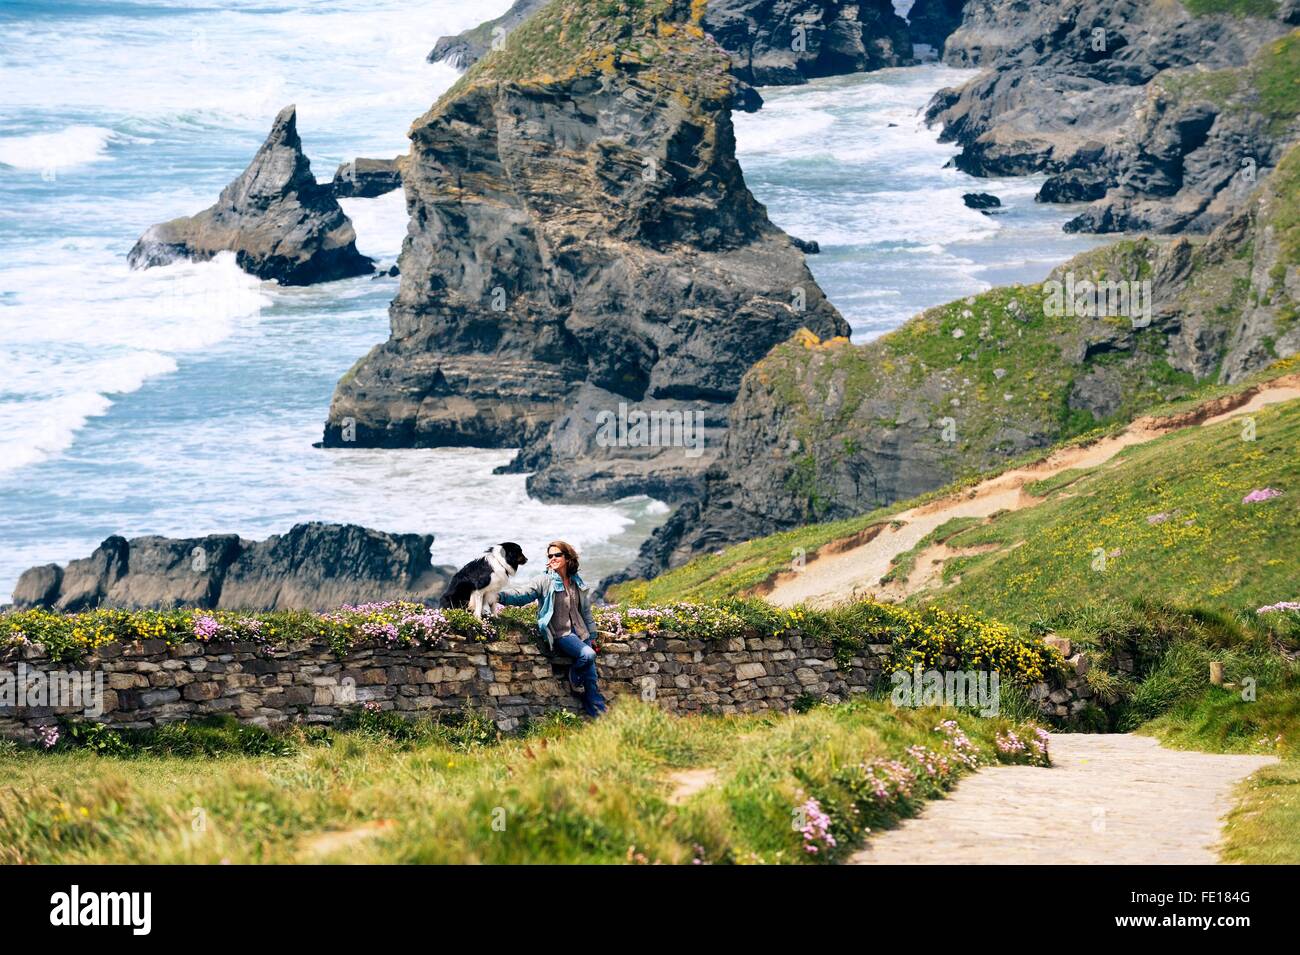 Sea stacks cliffs at Bedruthan Steps on the South West Coast Path near Newquay, Cornwall, England. Woman and border collie dog Stock Photo